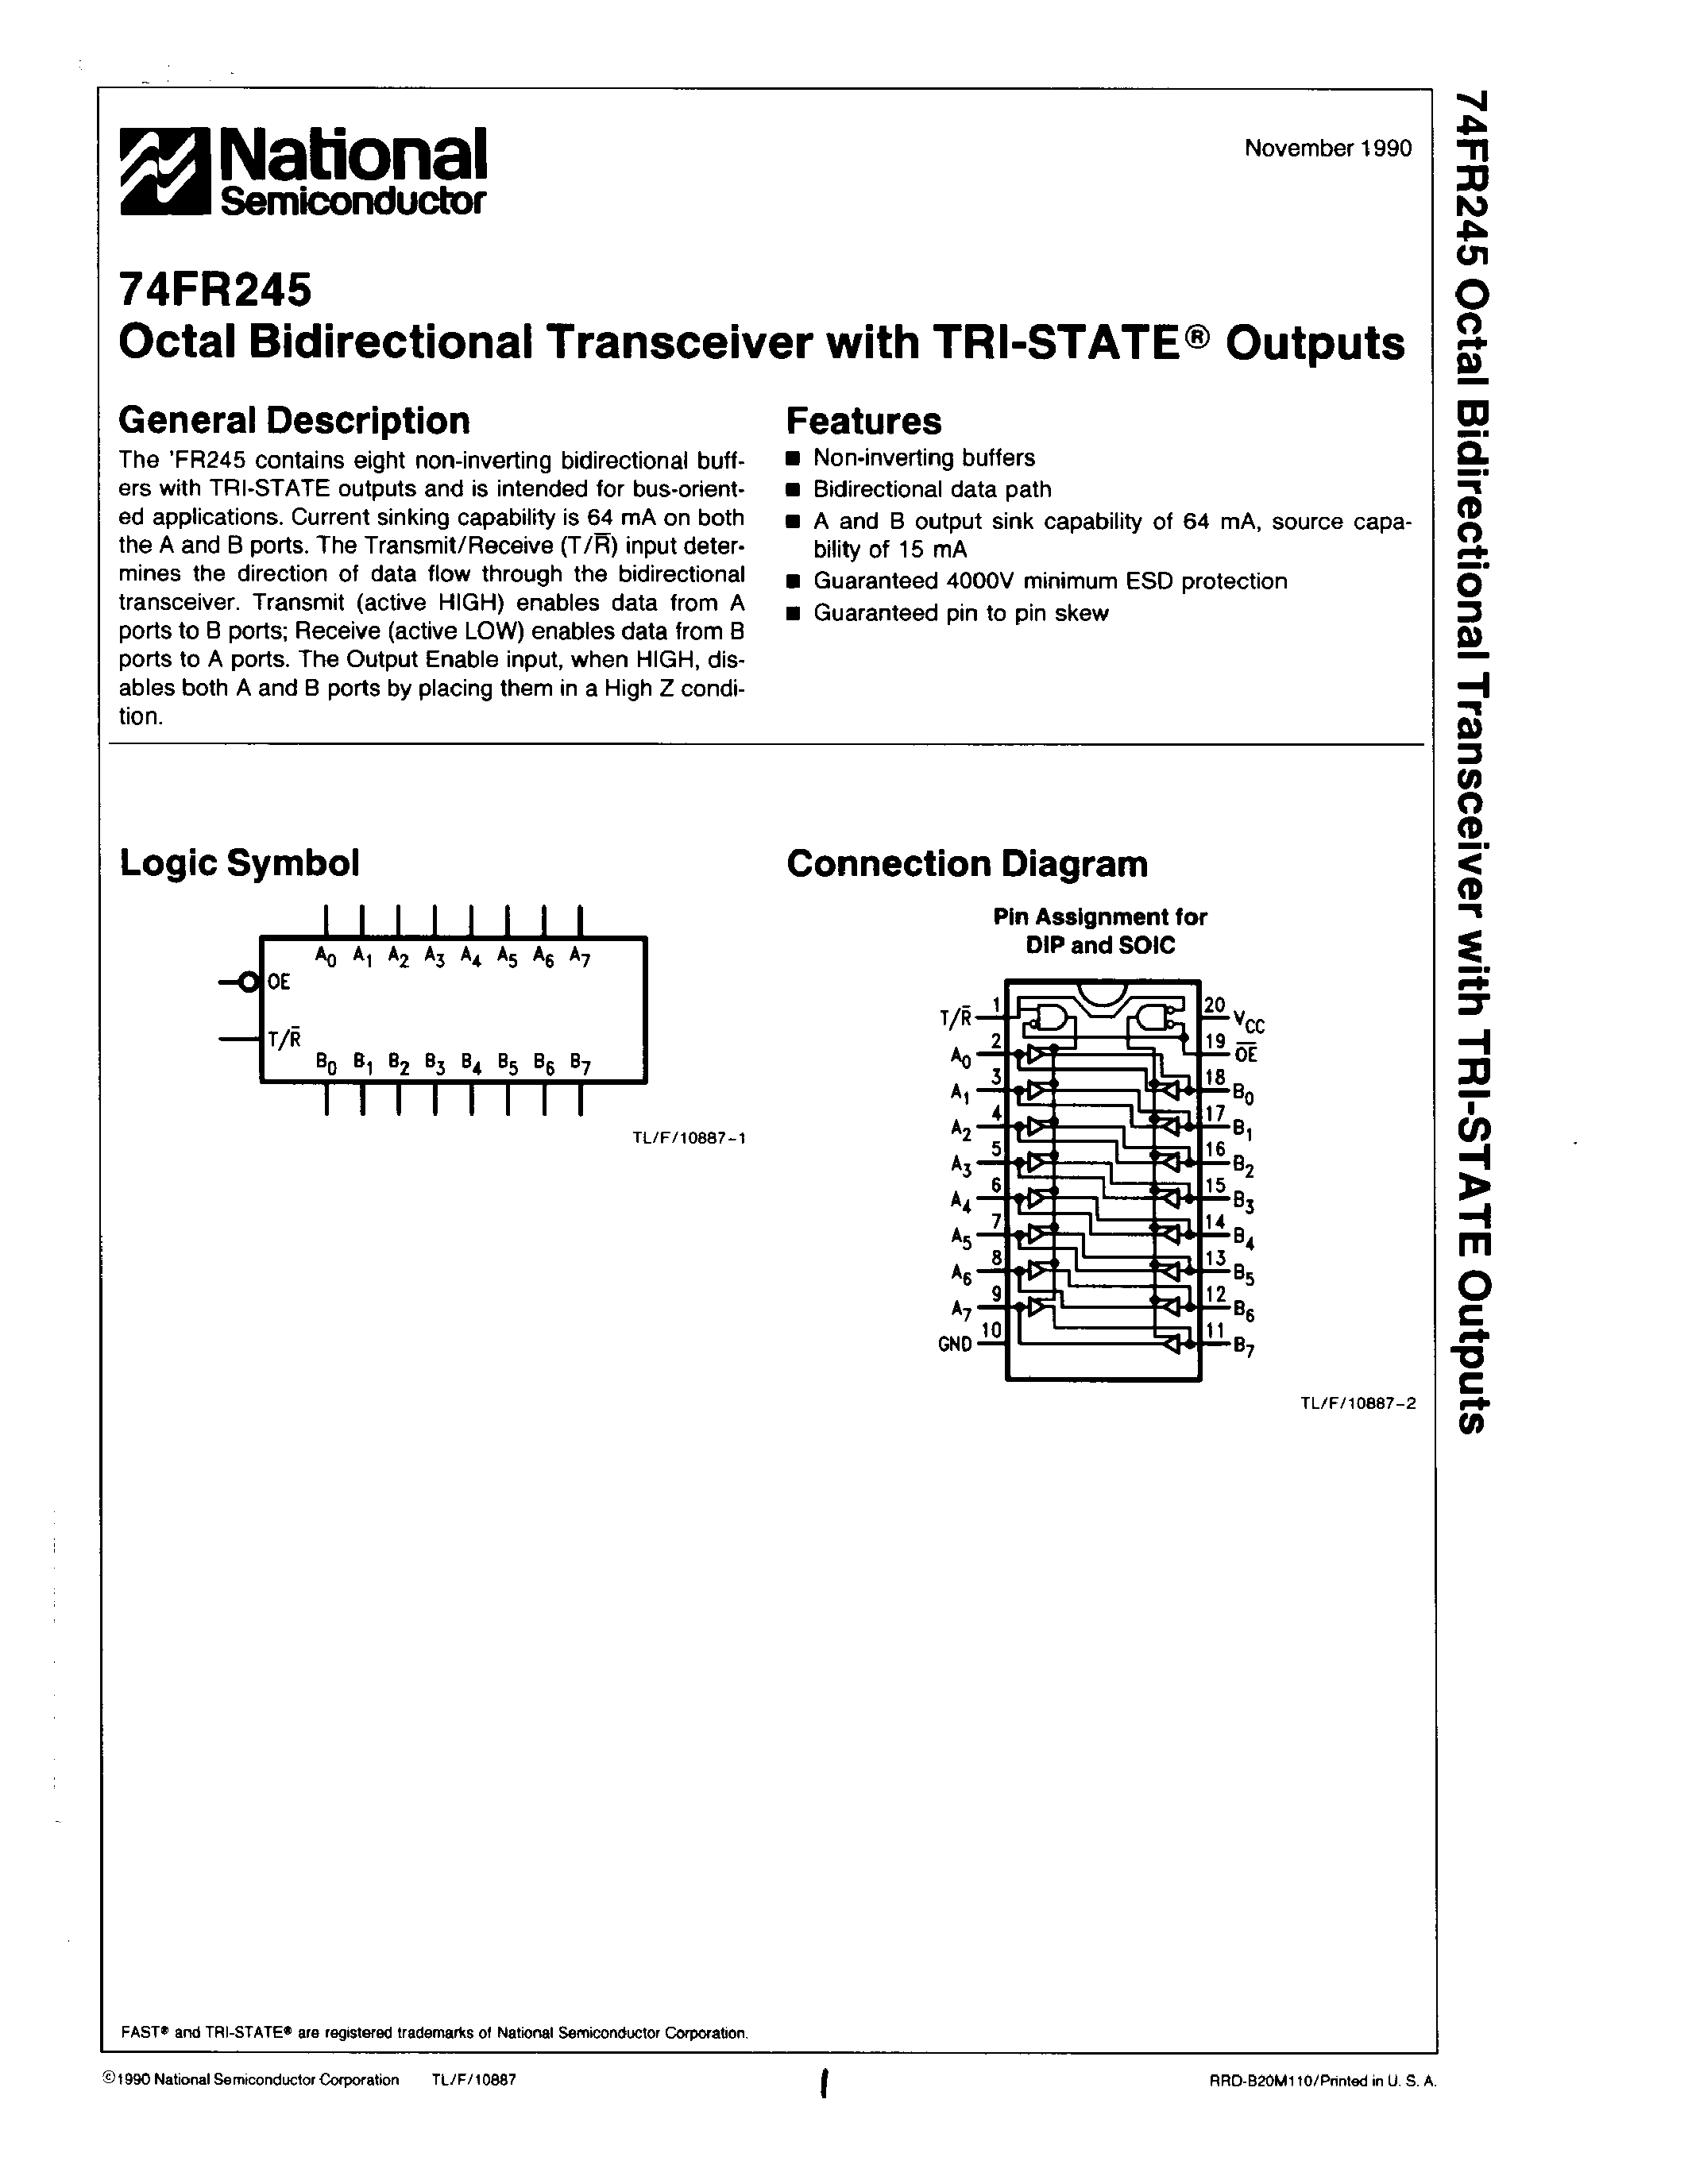 Даташит 74FR245 - Octal Bidirectional Transceiver with TRI-STATE Outputs страница 1